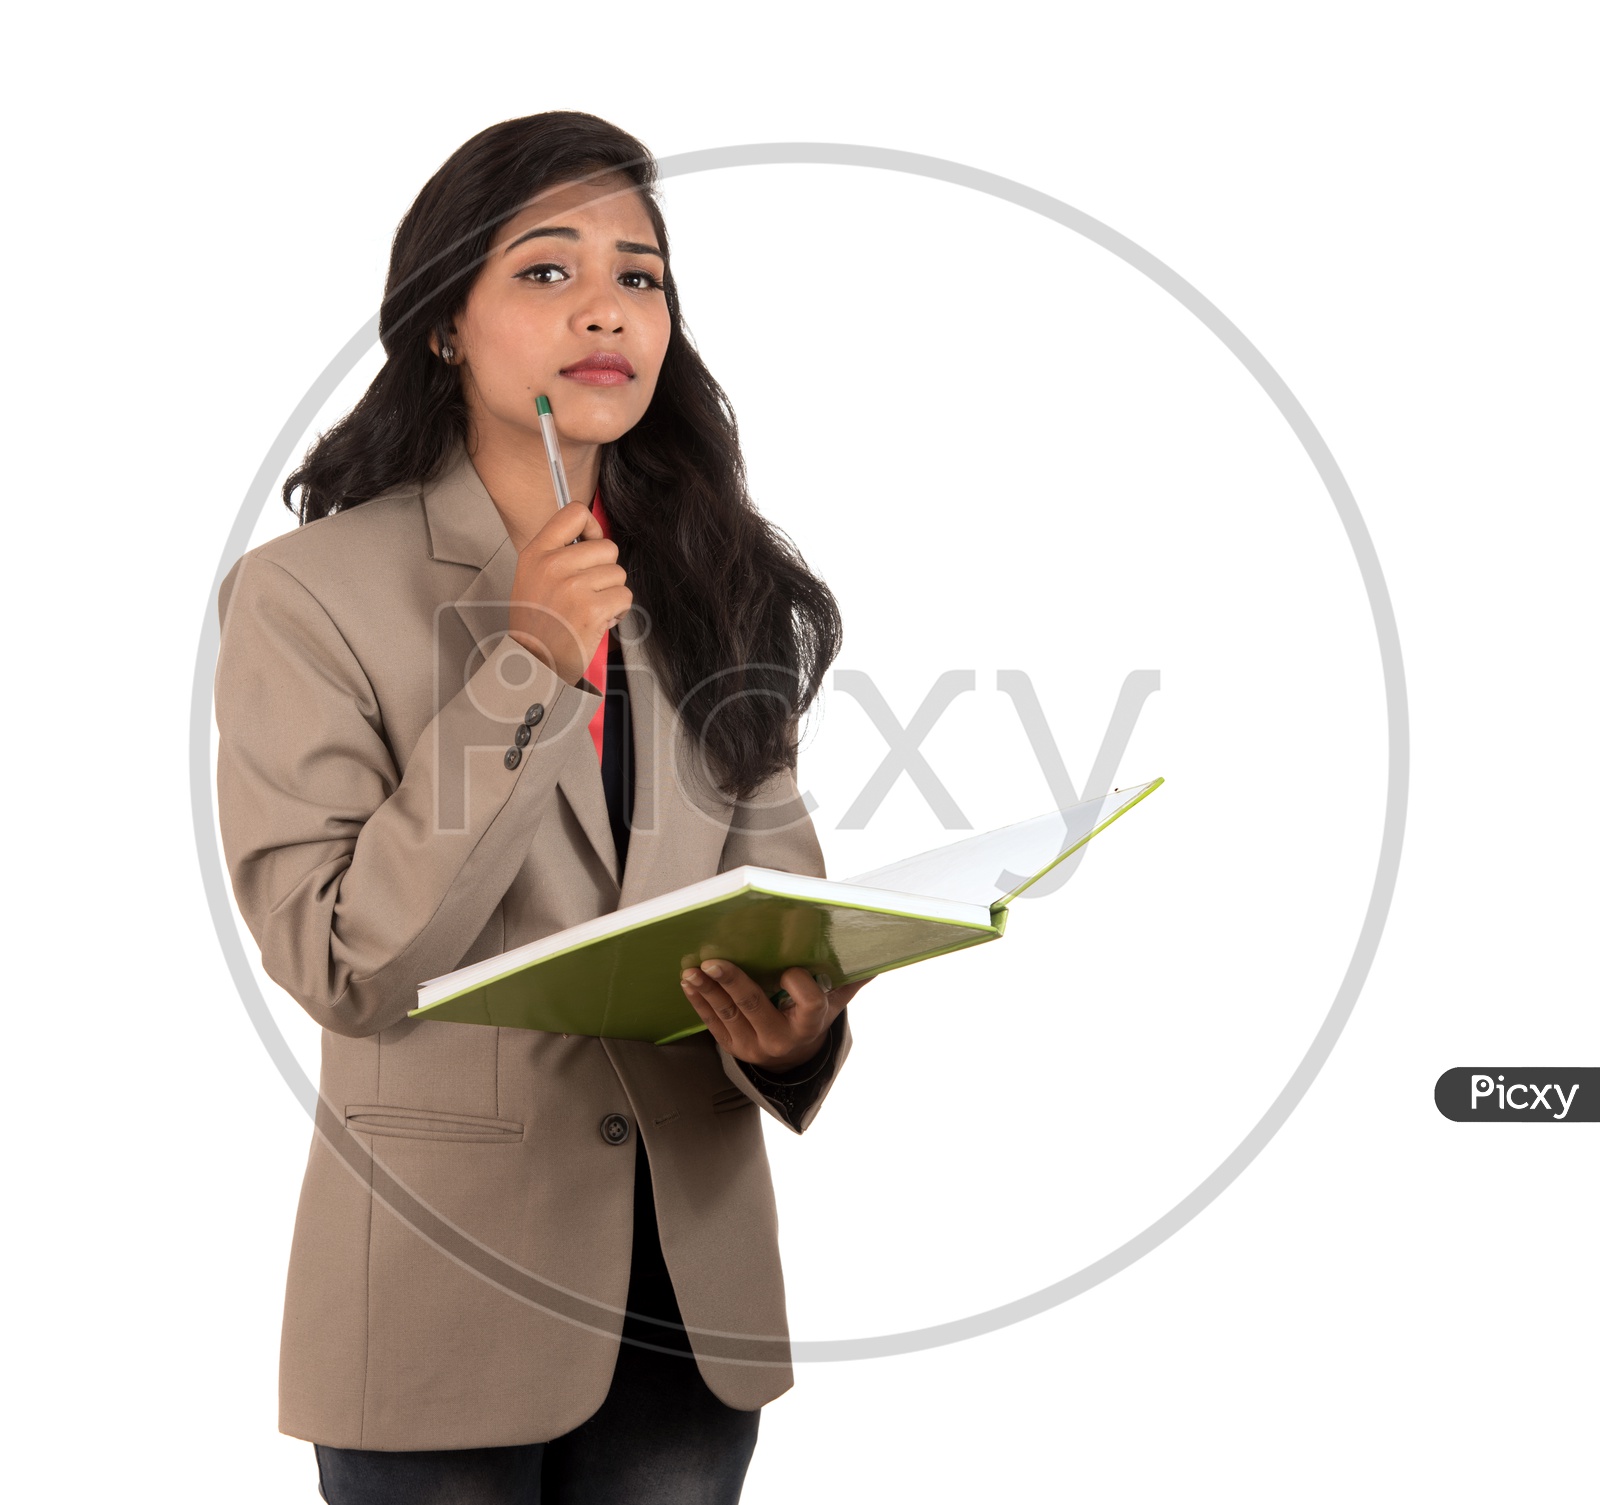 Young Indian business woman holding a book and a pen